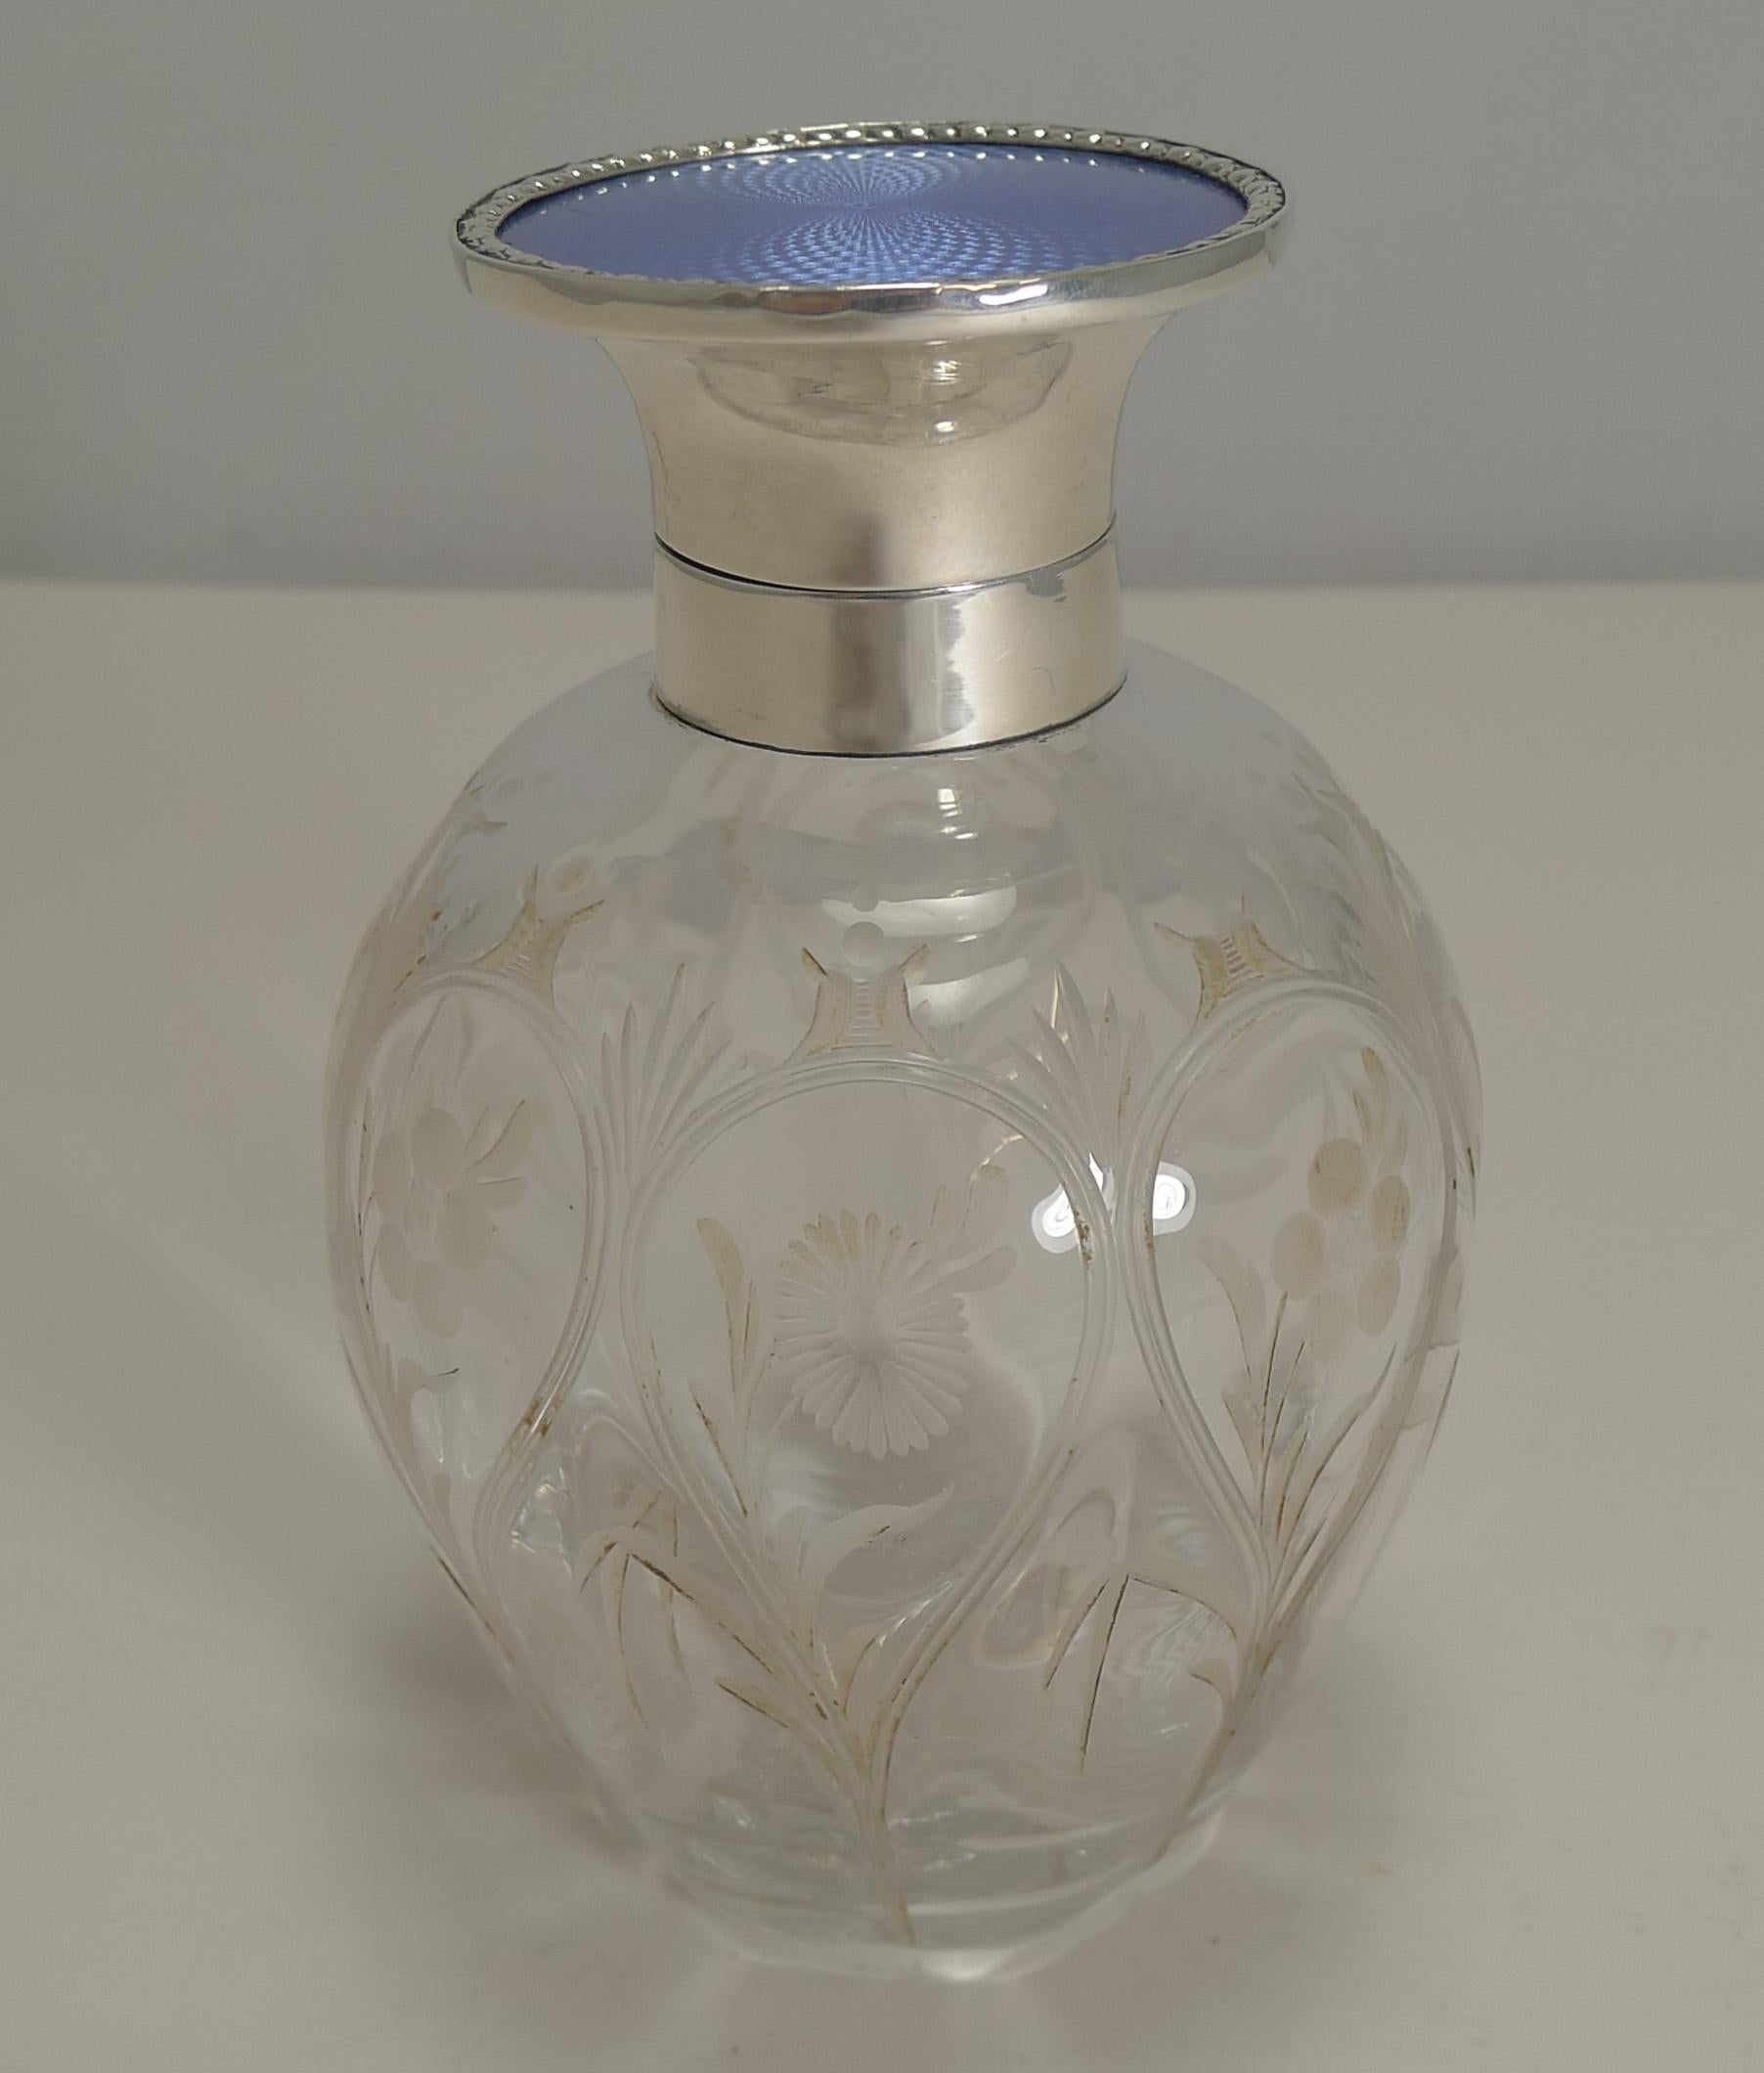 Pretty as a picture, this English Edwardian perfume or Scent bottle is made of hand-blown crystal with stunning floral wheel engraved decoration all around, lovely quality and very tactile.

The collar and hinged lid are made from English sterling